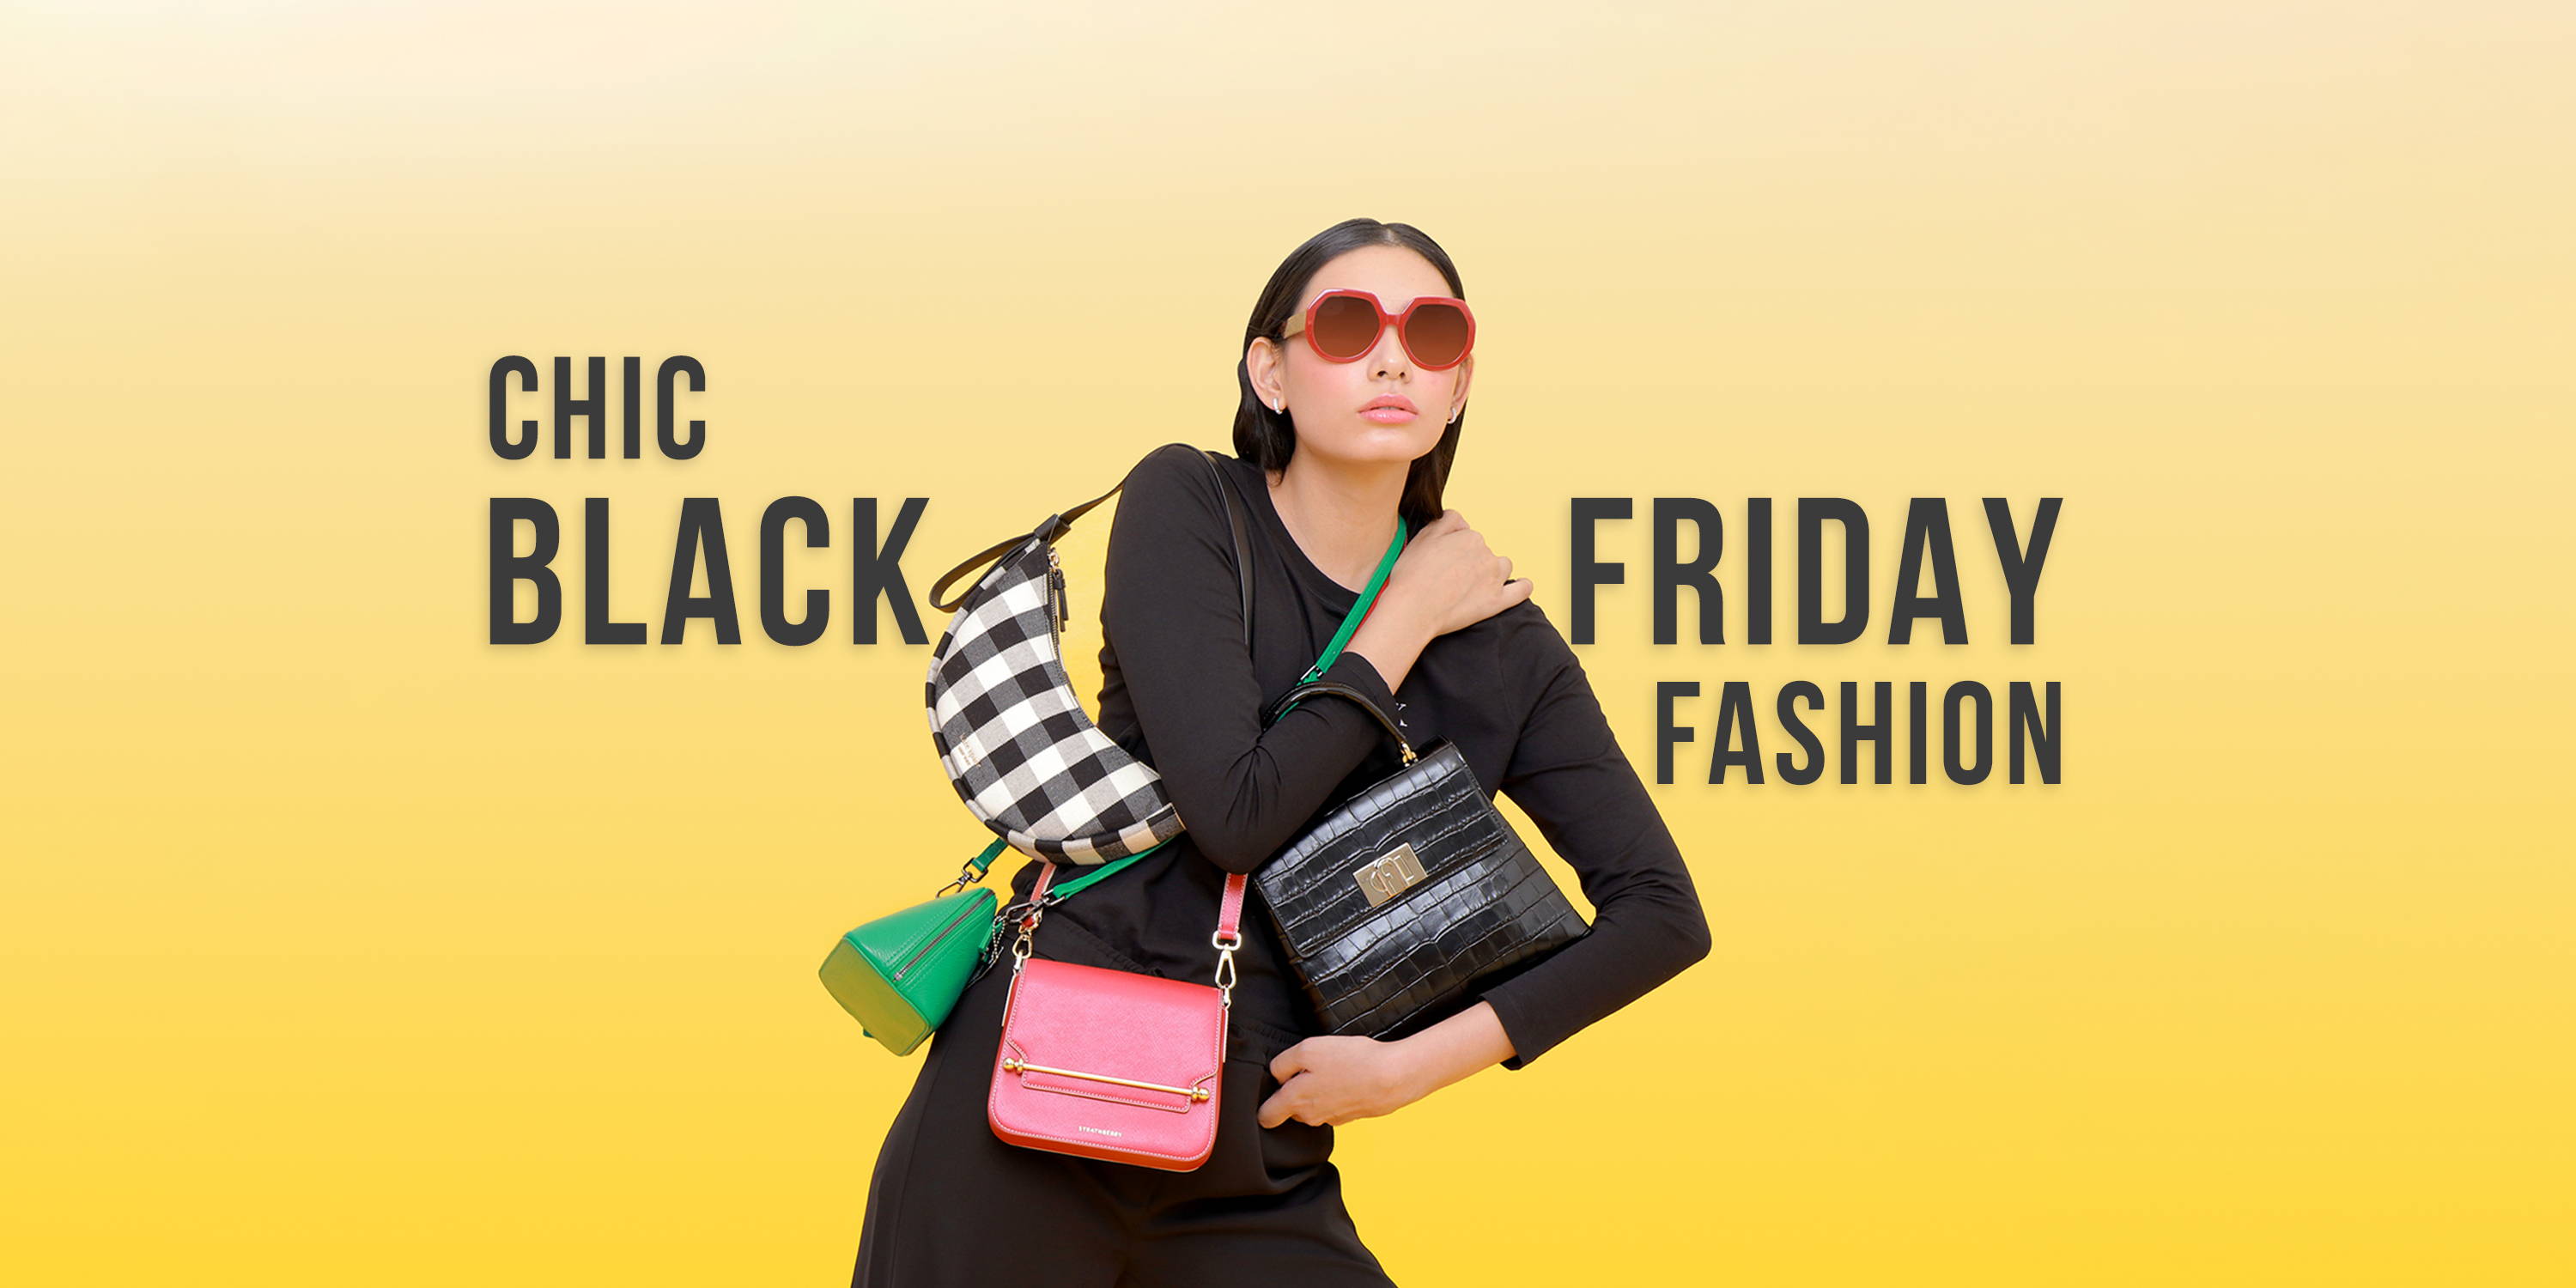 Chic Fashion Finds for An Exciting Black Friday Weekend